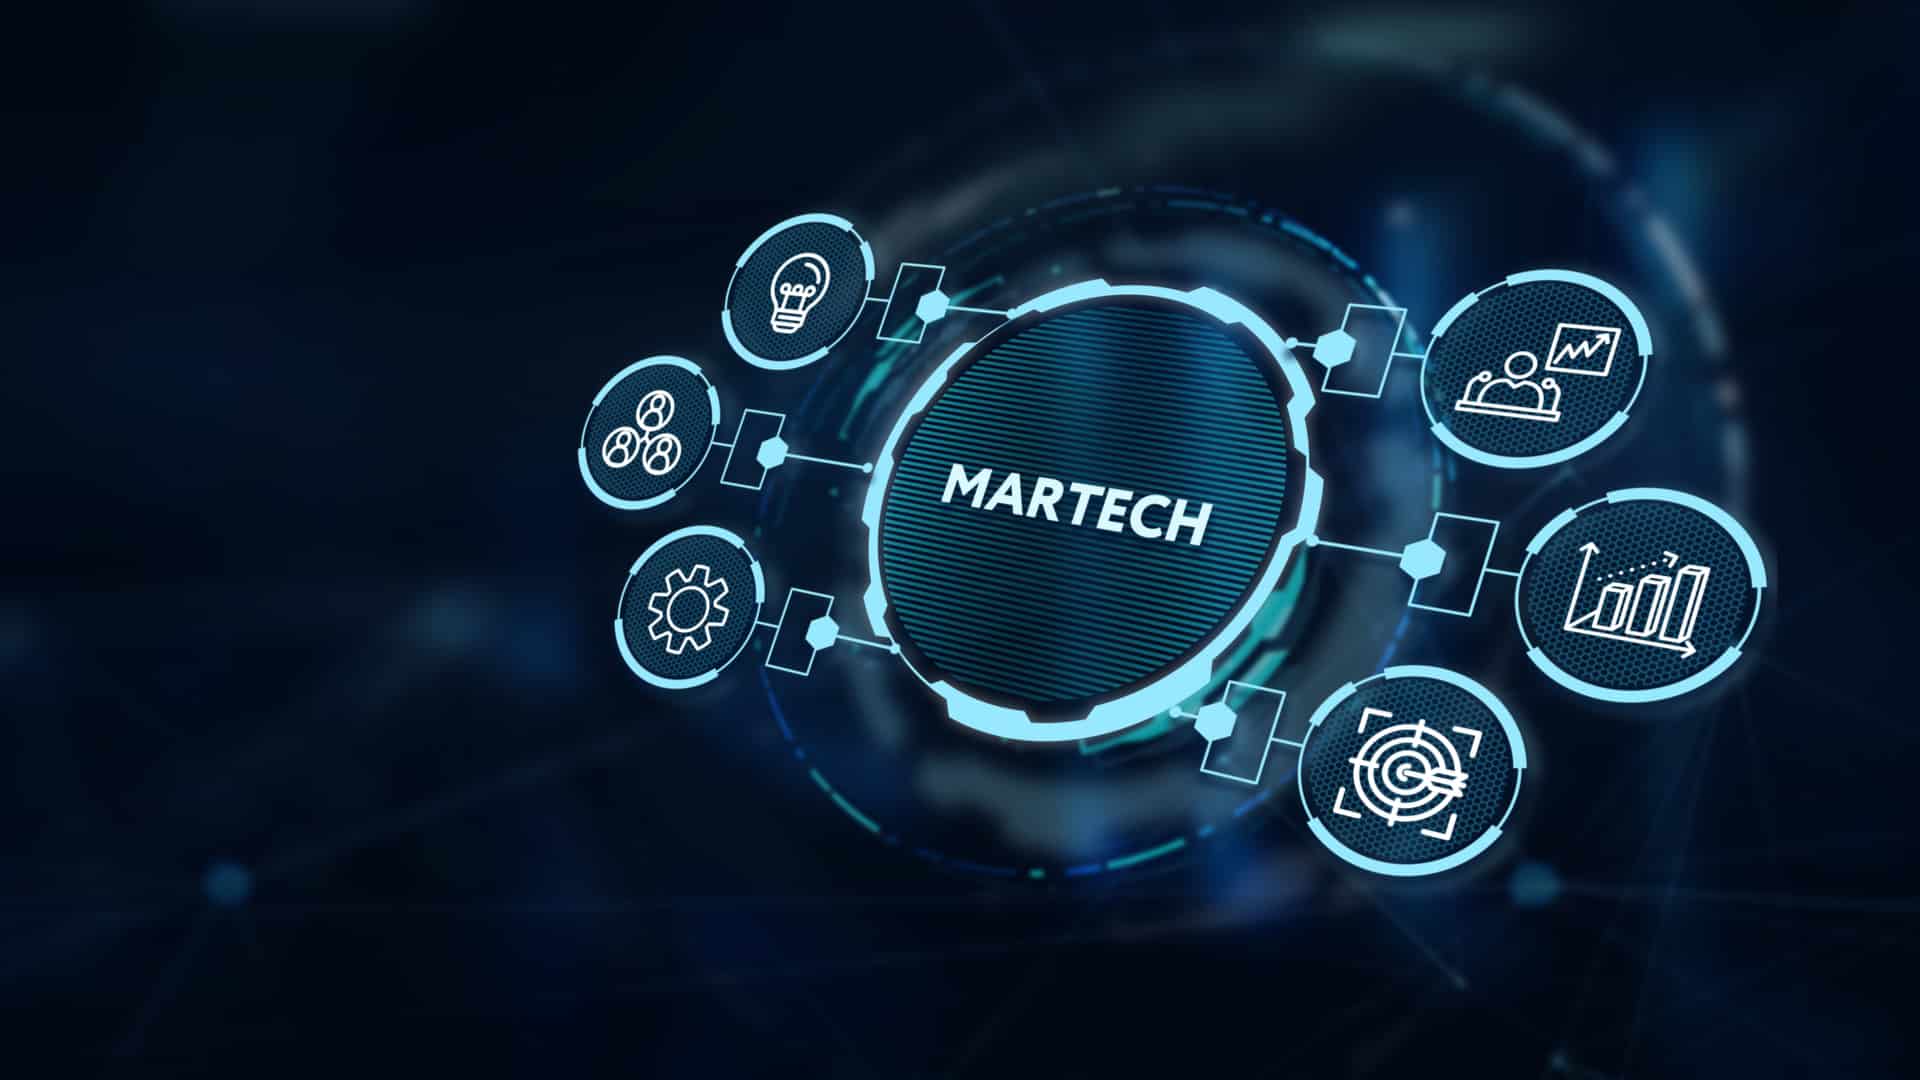 Four elements of a powerful, data-driven martech stack